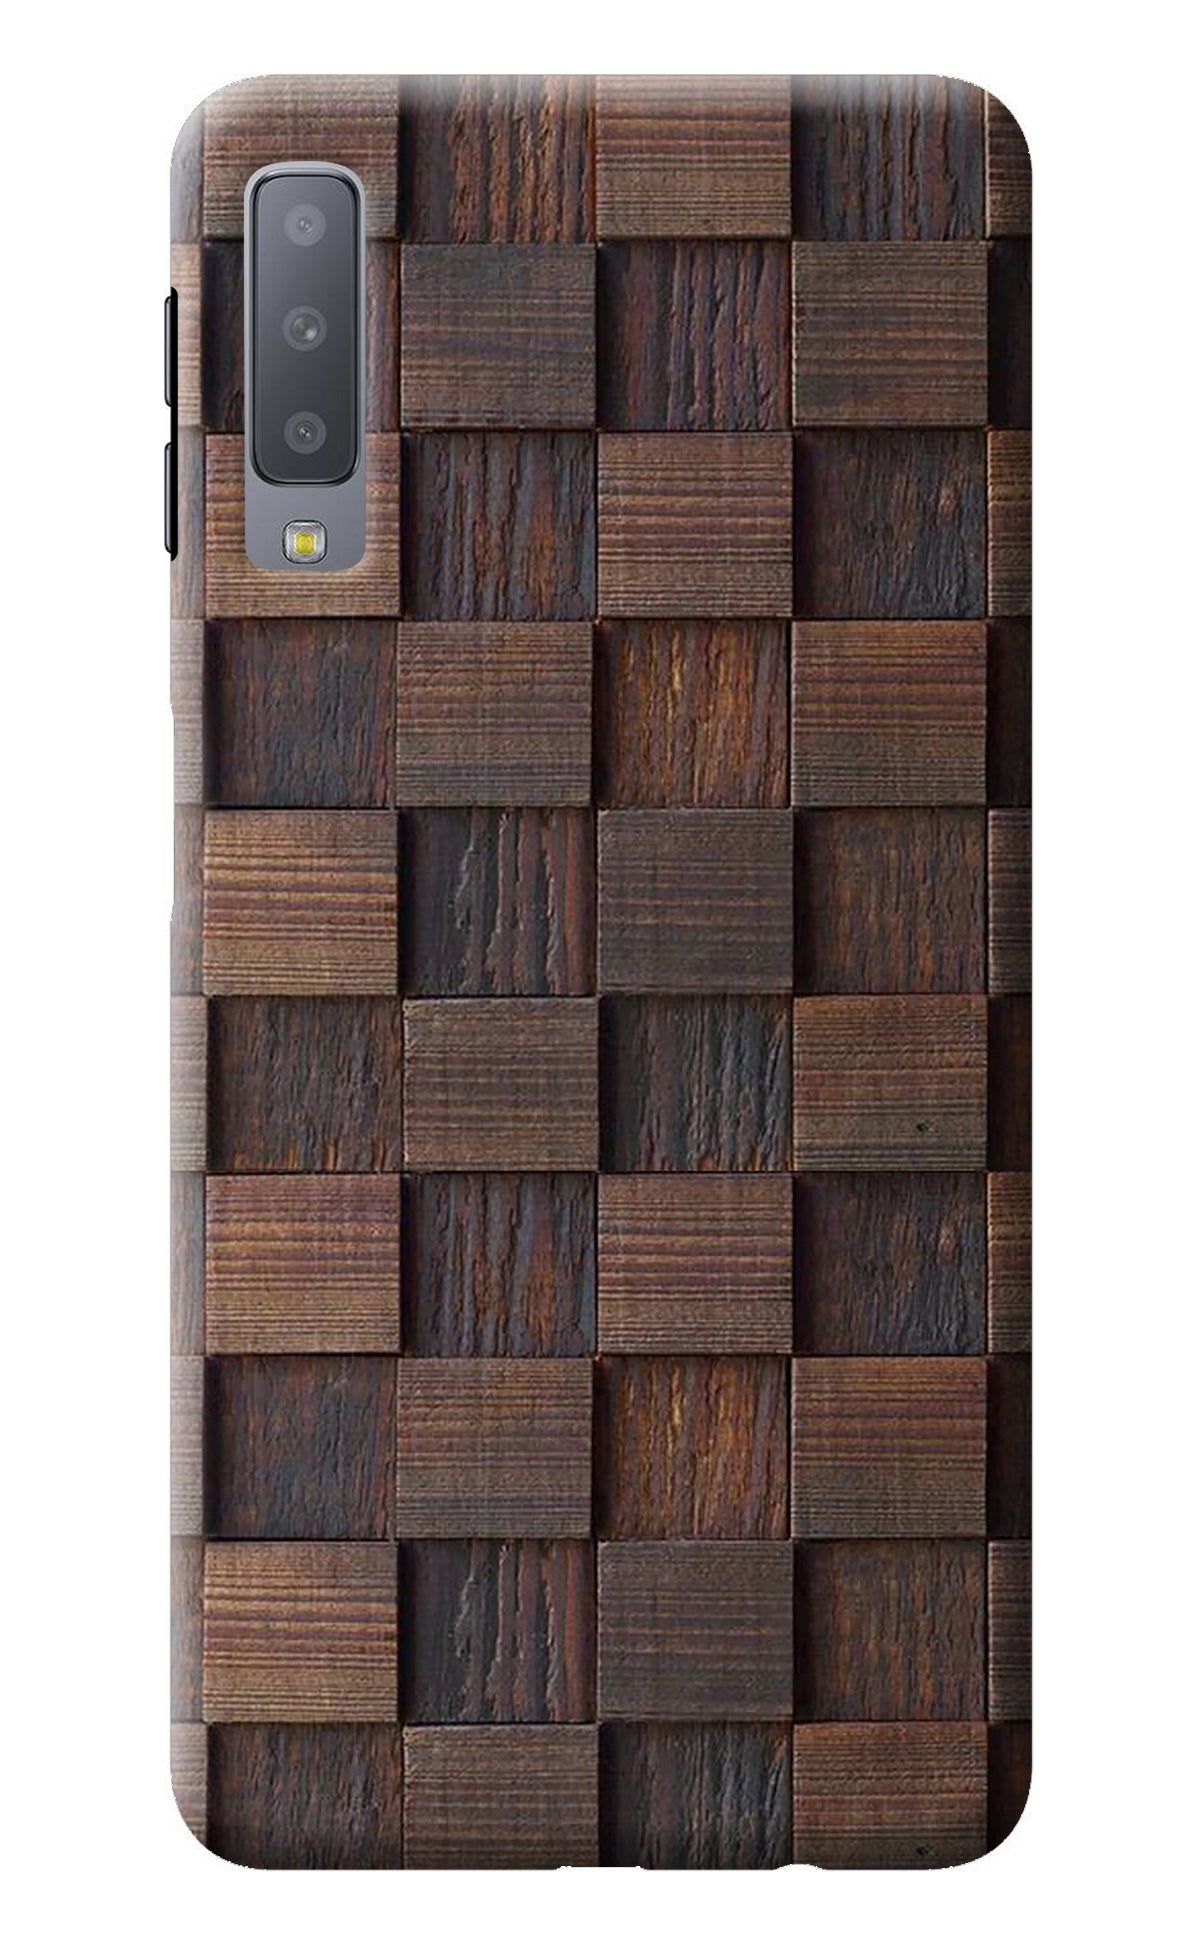 Wooden Cube Design Samsung A7 Back Cover